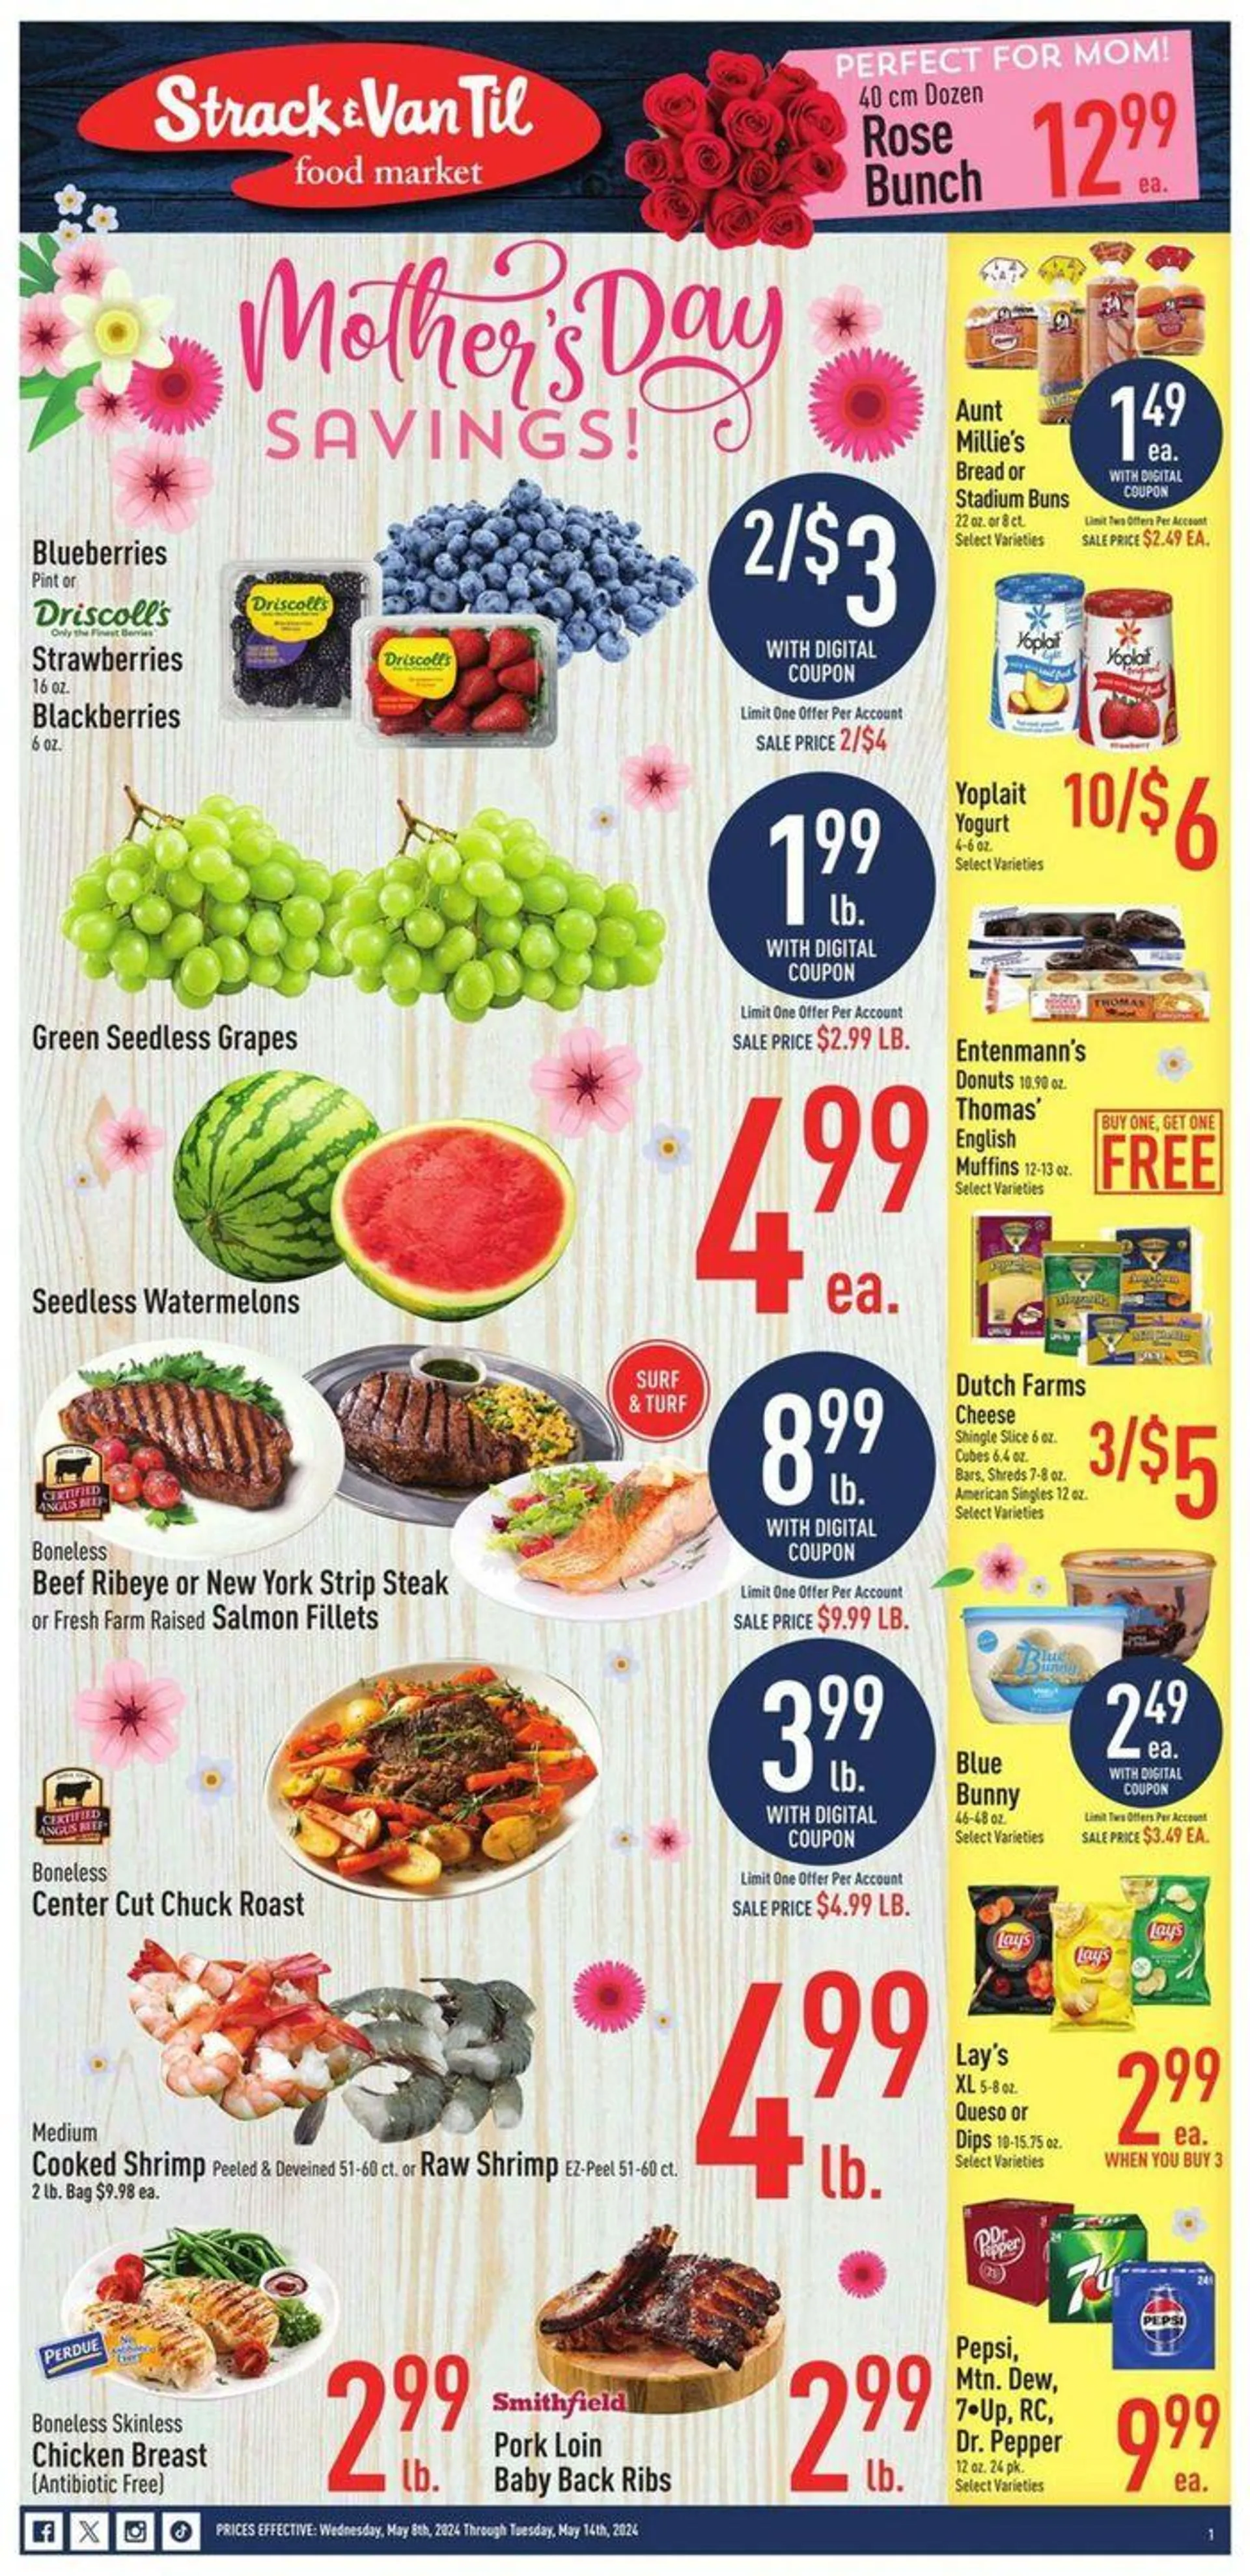 Mothers Day Savings - 1